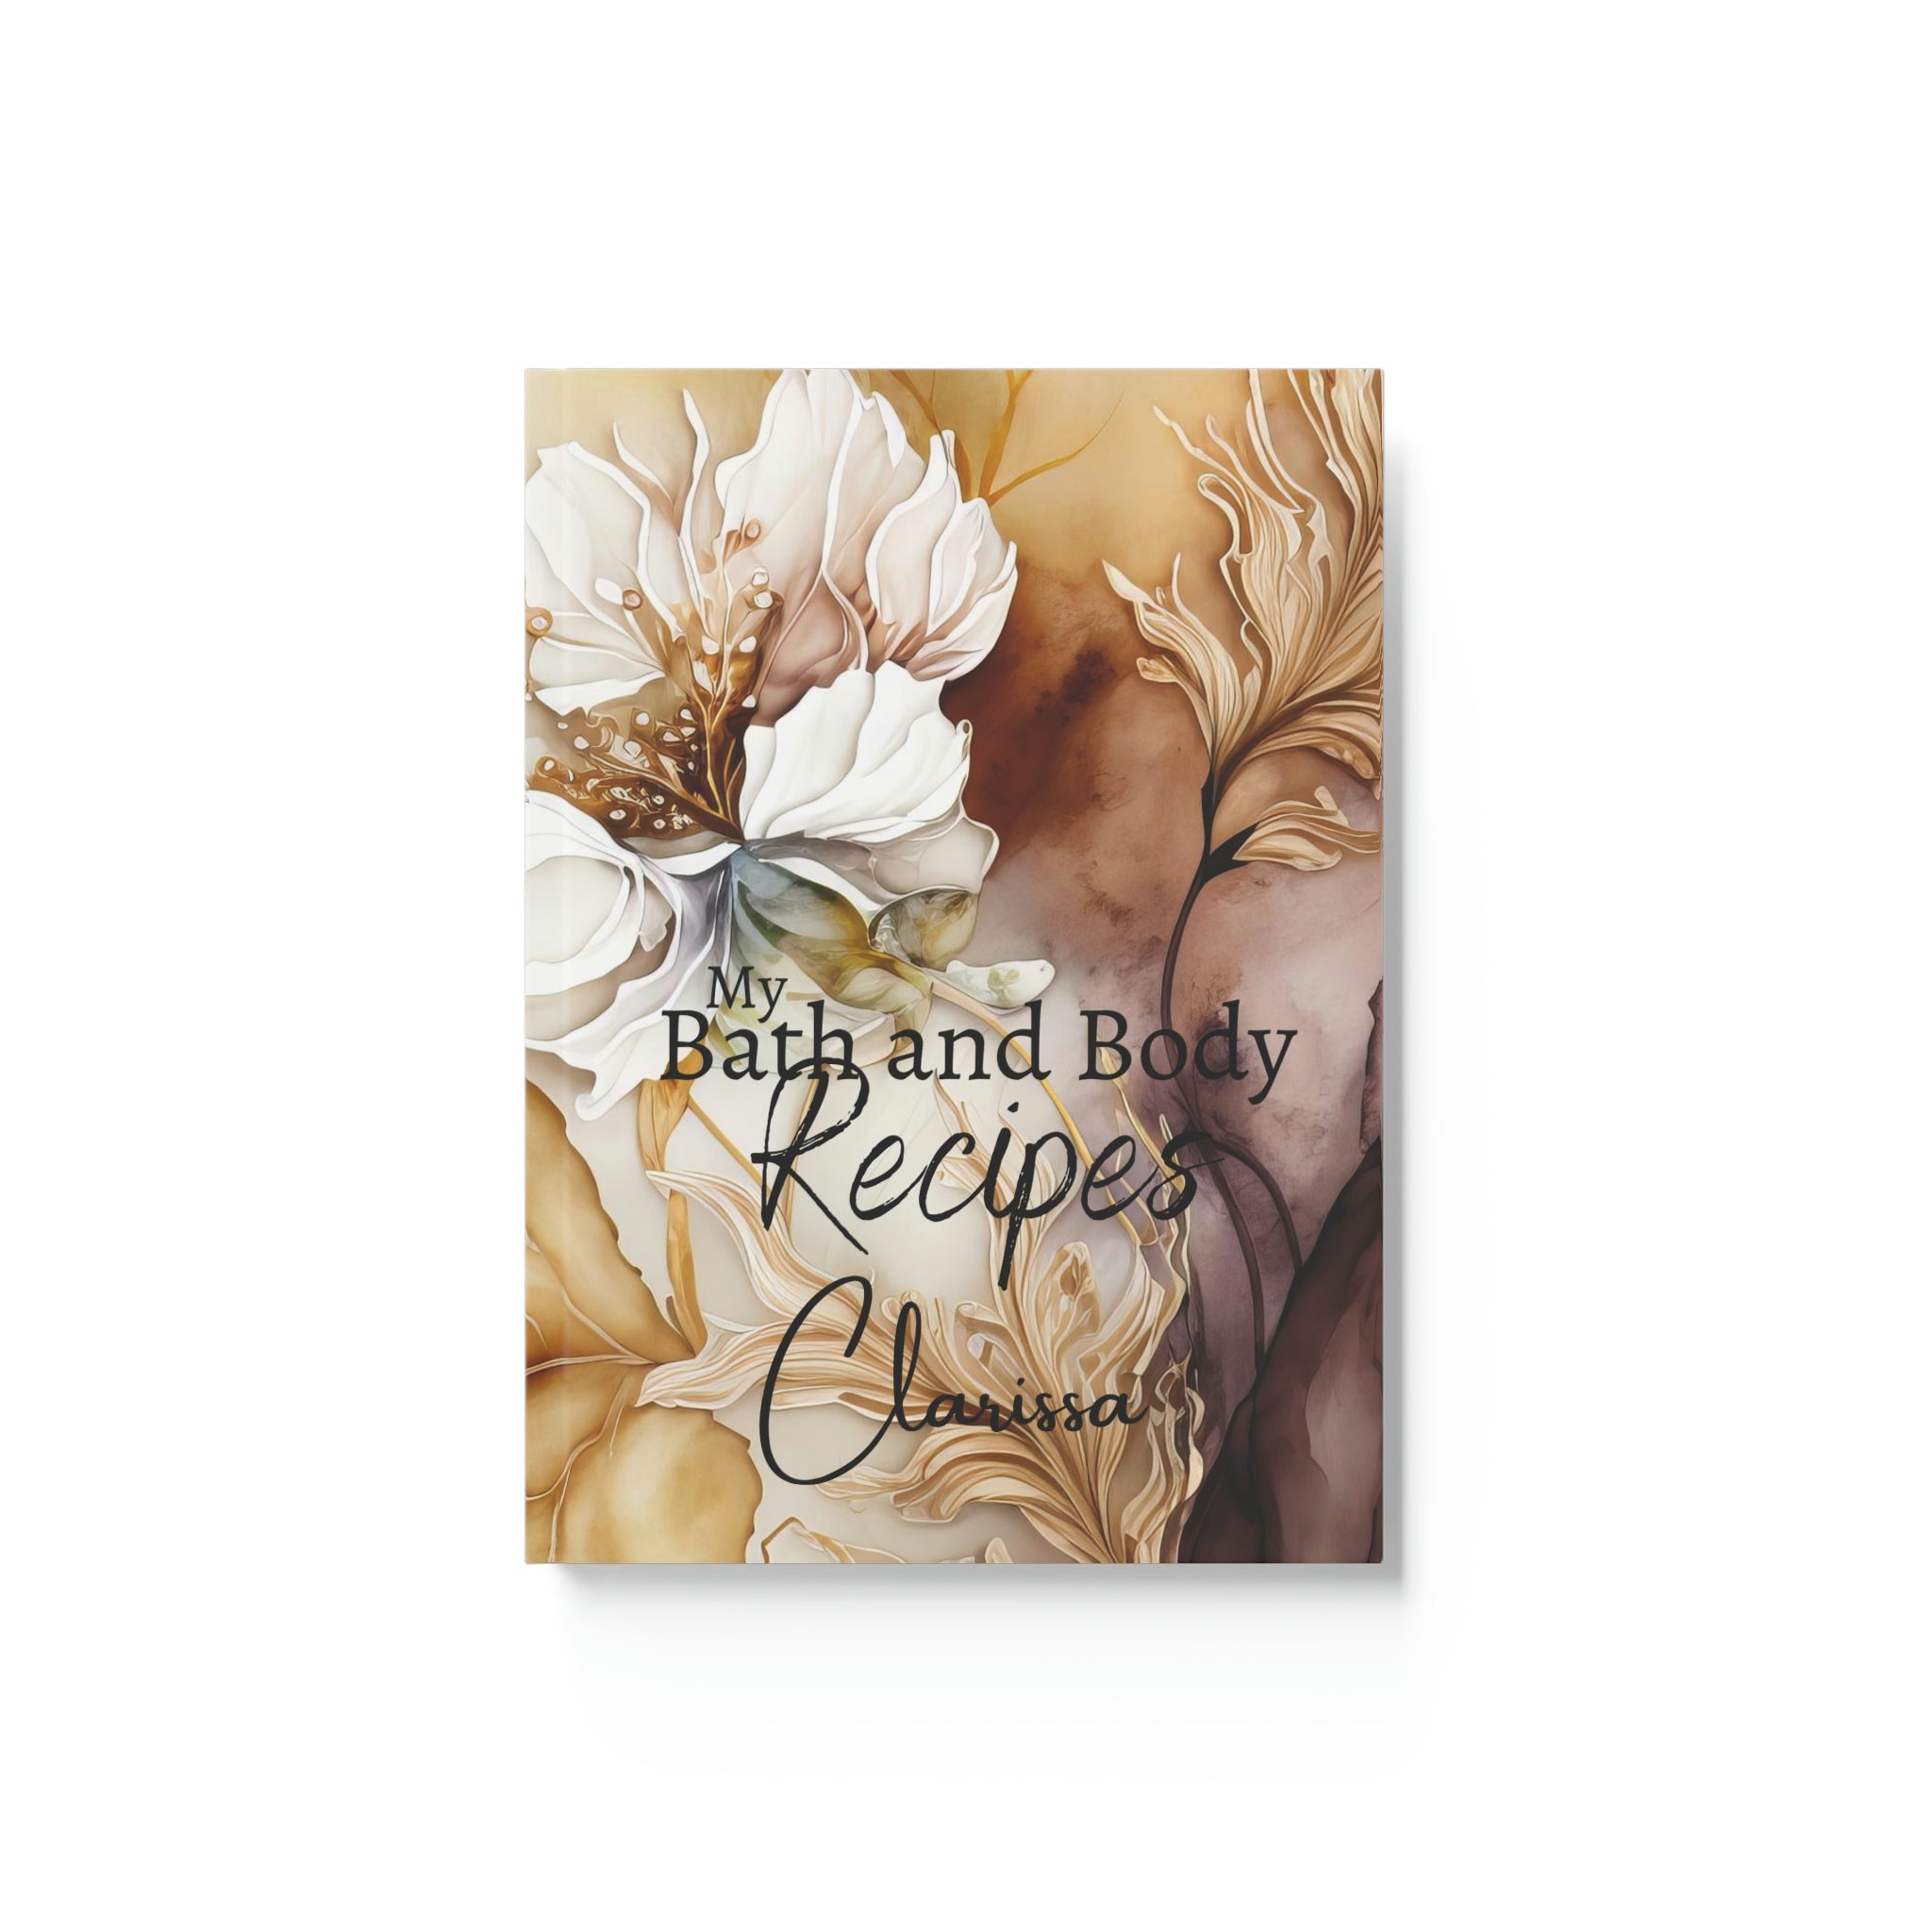 Floral, Personalised Journal for your Bath and Body Recipes